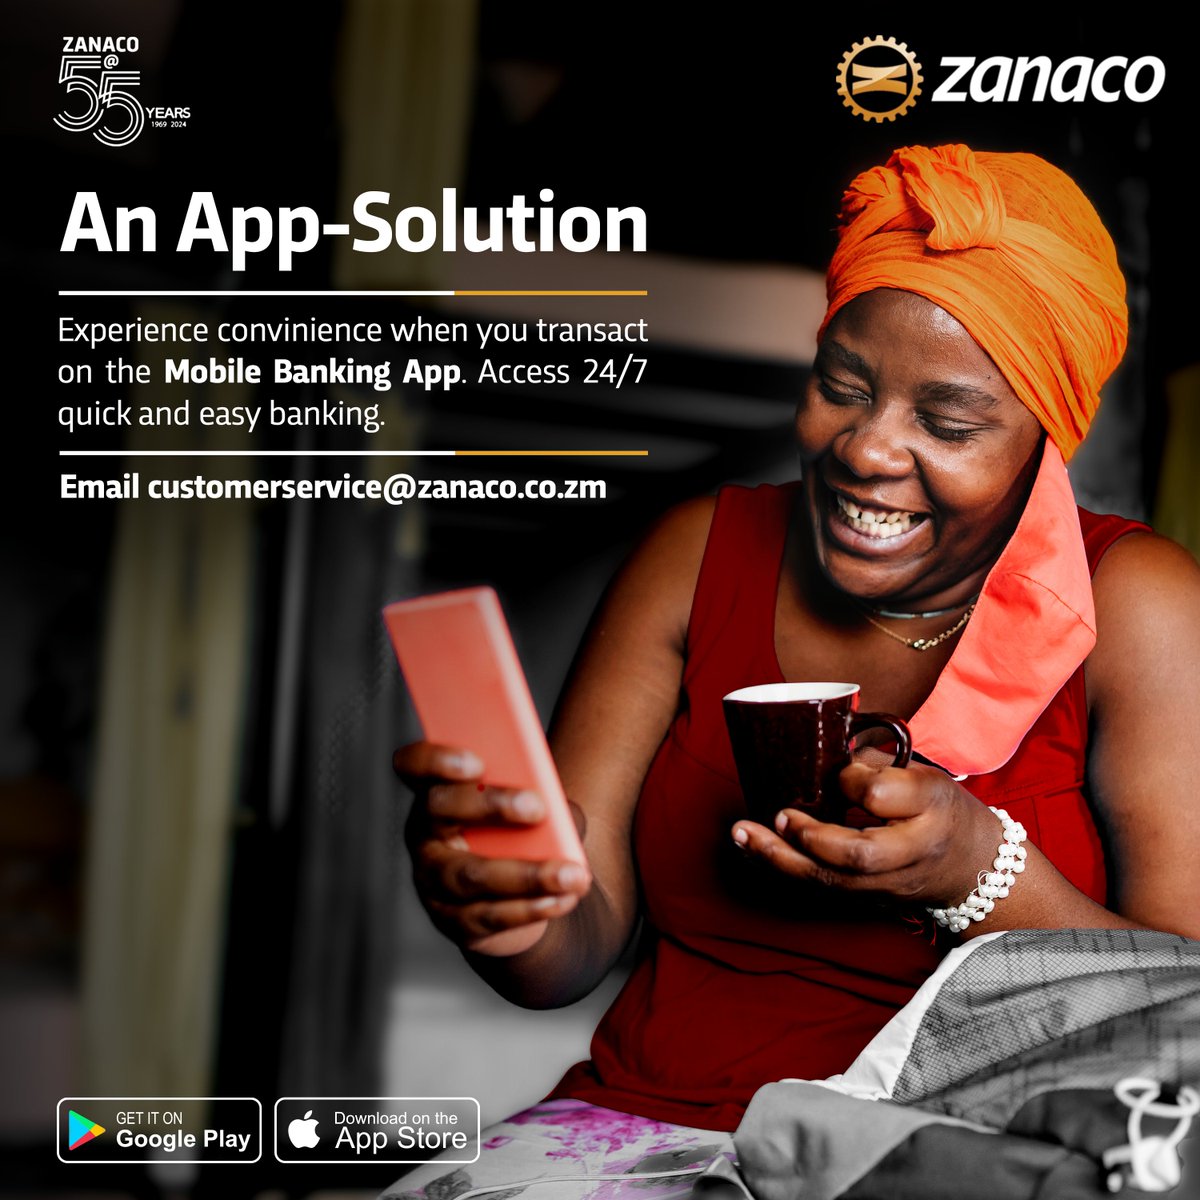 Tap into efficient banking with the Zanaco Mobile Banking App. Banking just got quicker.